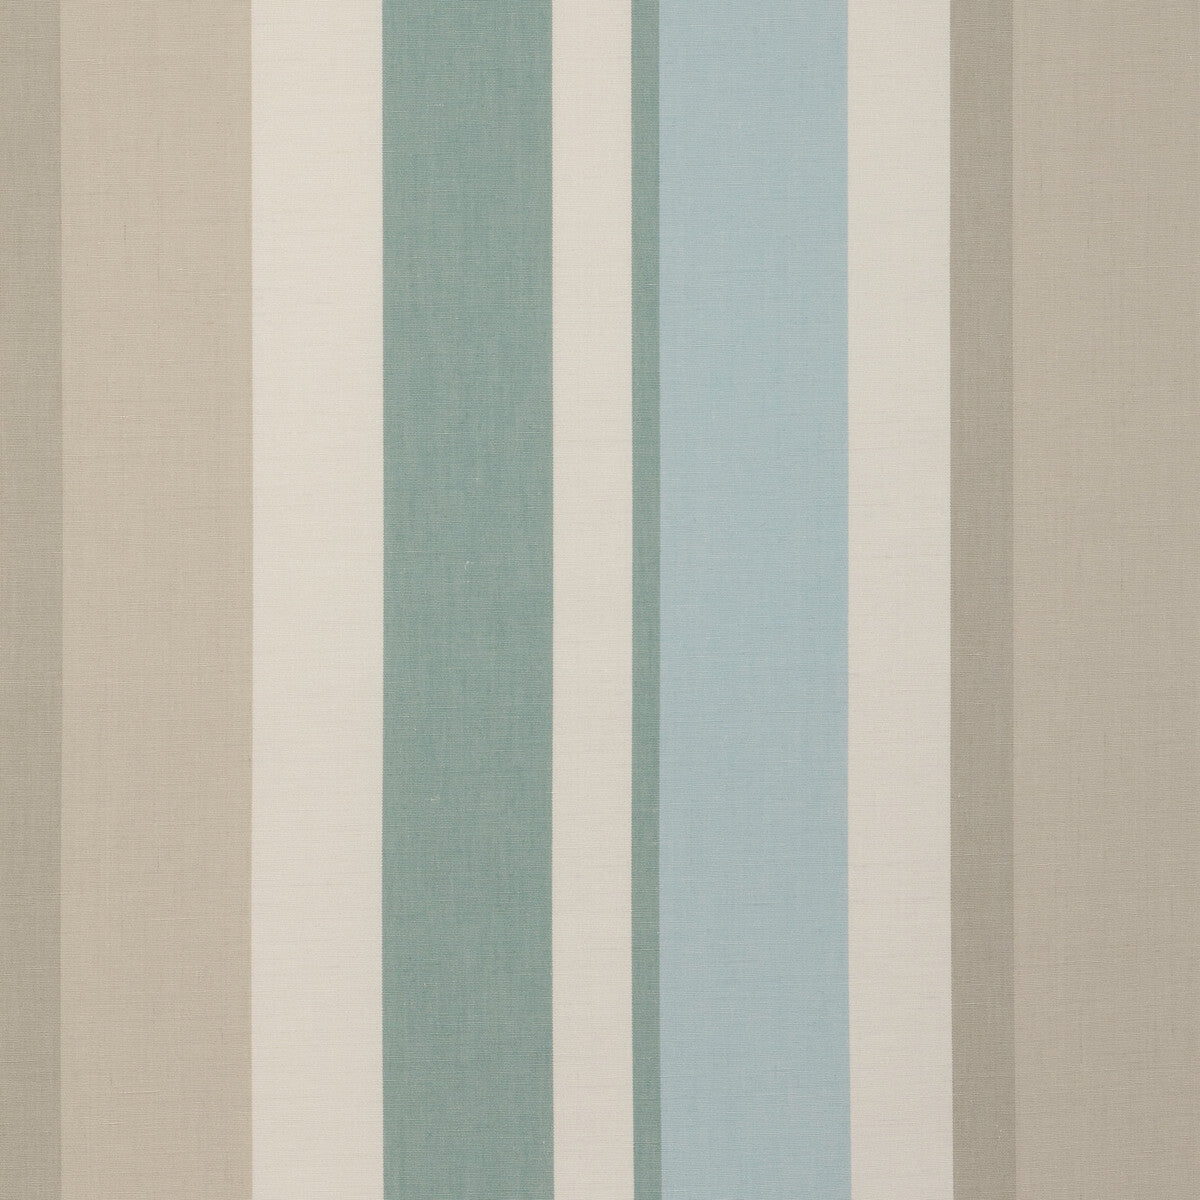 Fisher Stripe fabric in sky/stone color - pattern 2023108.1511.0 - by Lee Jofa in the Highfield Stripes And Plaids collection